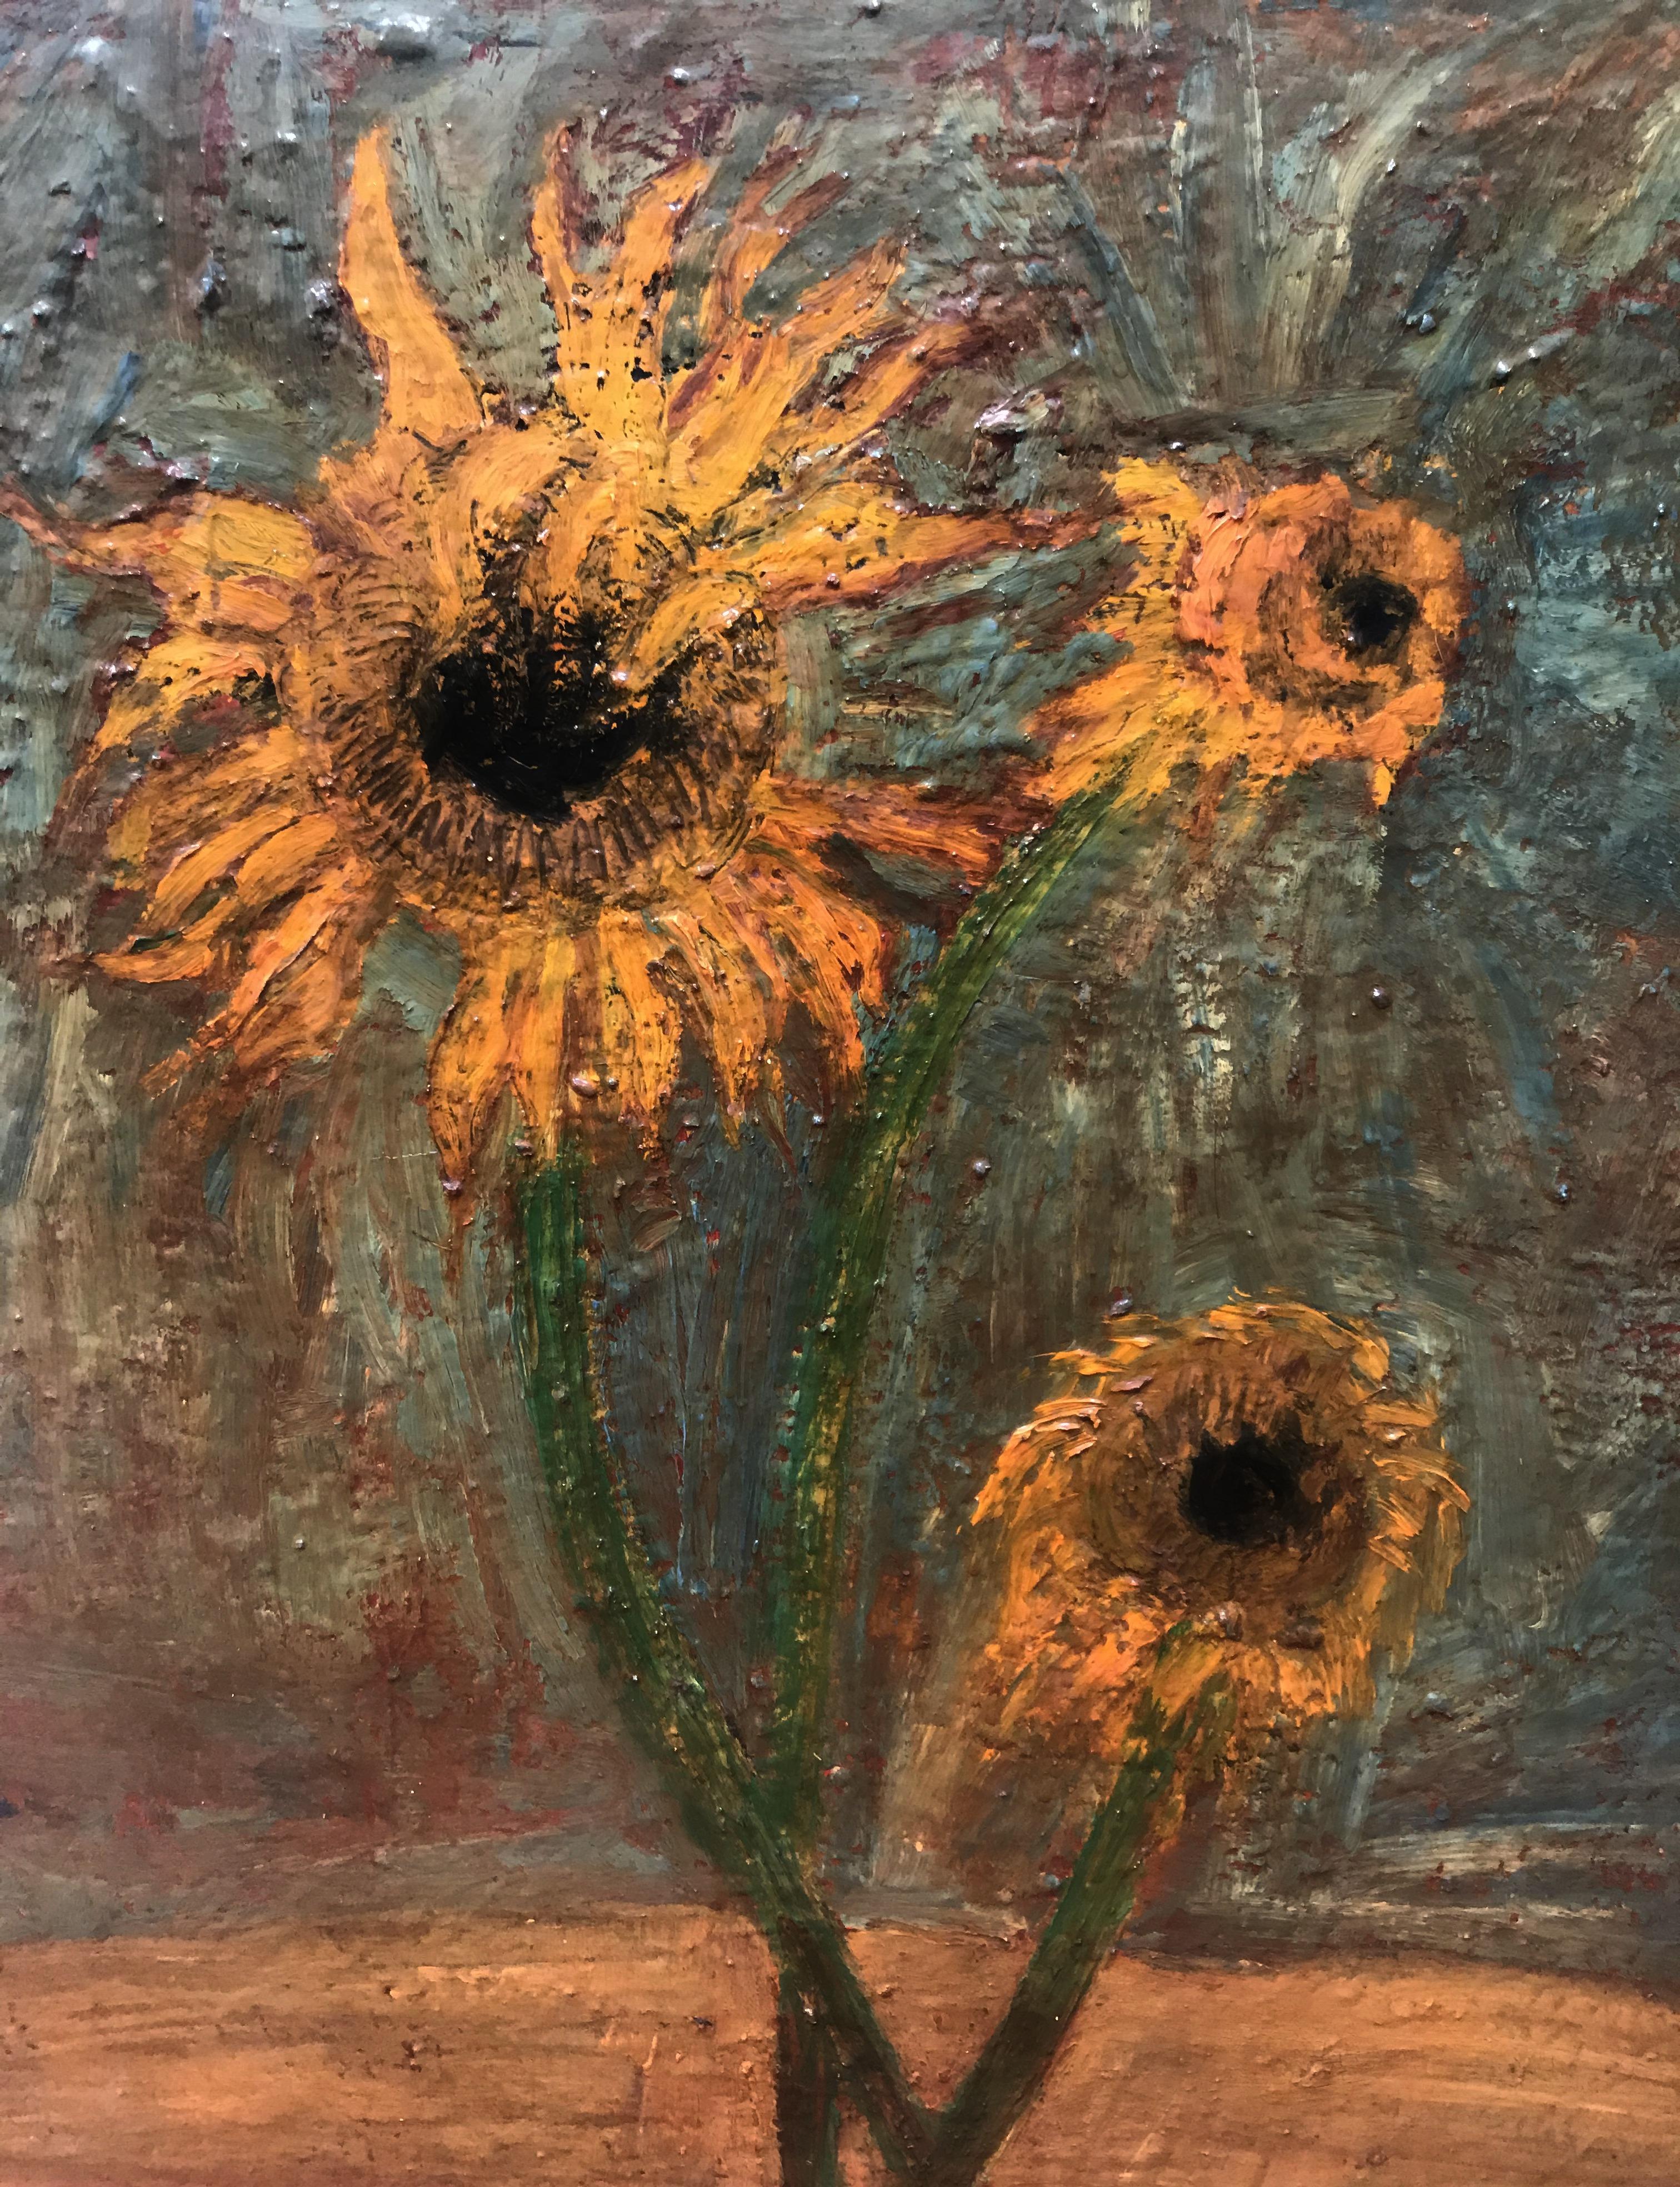 Oil painting on canvas featuring sunflowers by Barbara Dodge.
Energetic painting made with multiple layers of oil paint. This frenetic painter never tried to sell her work in an auction, which explains that we cannot find much on her! But her work